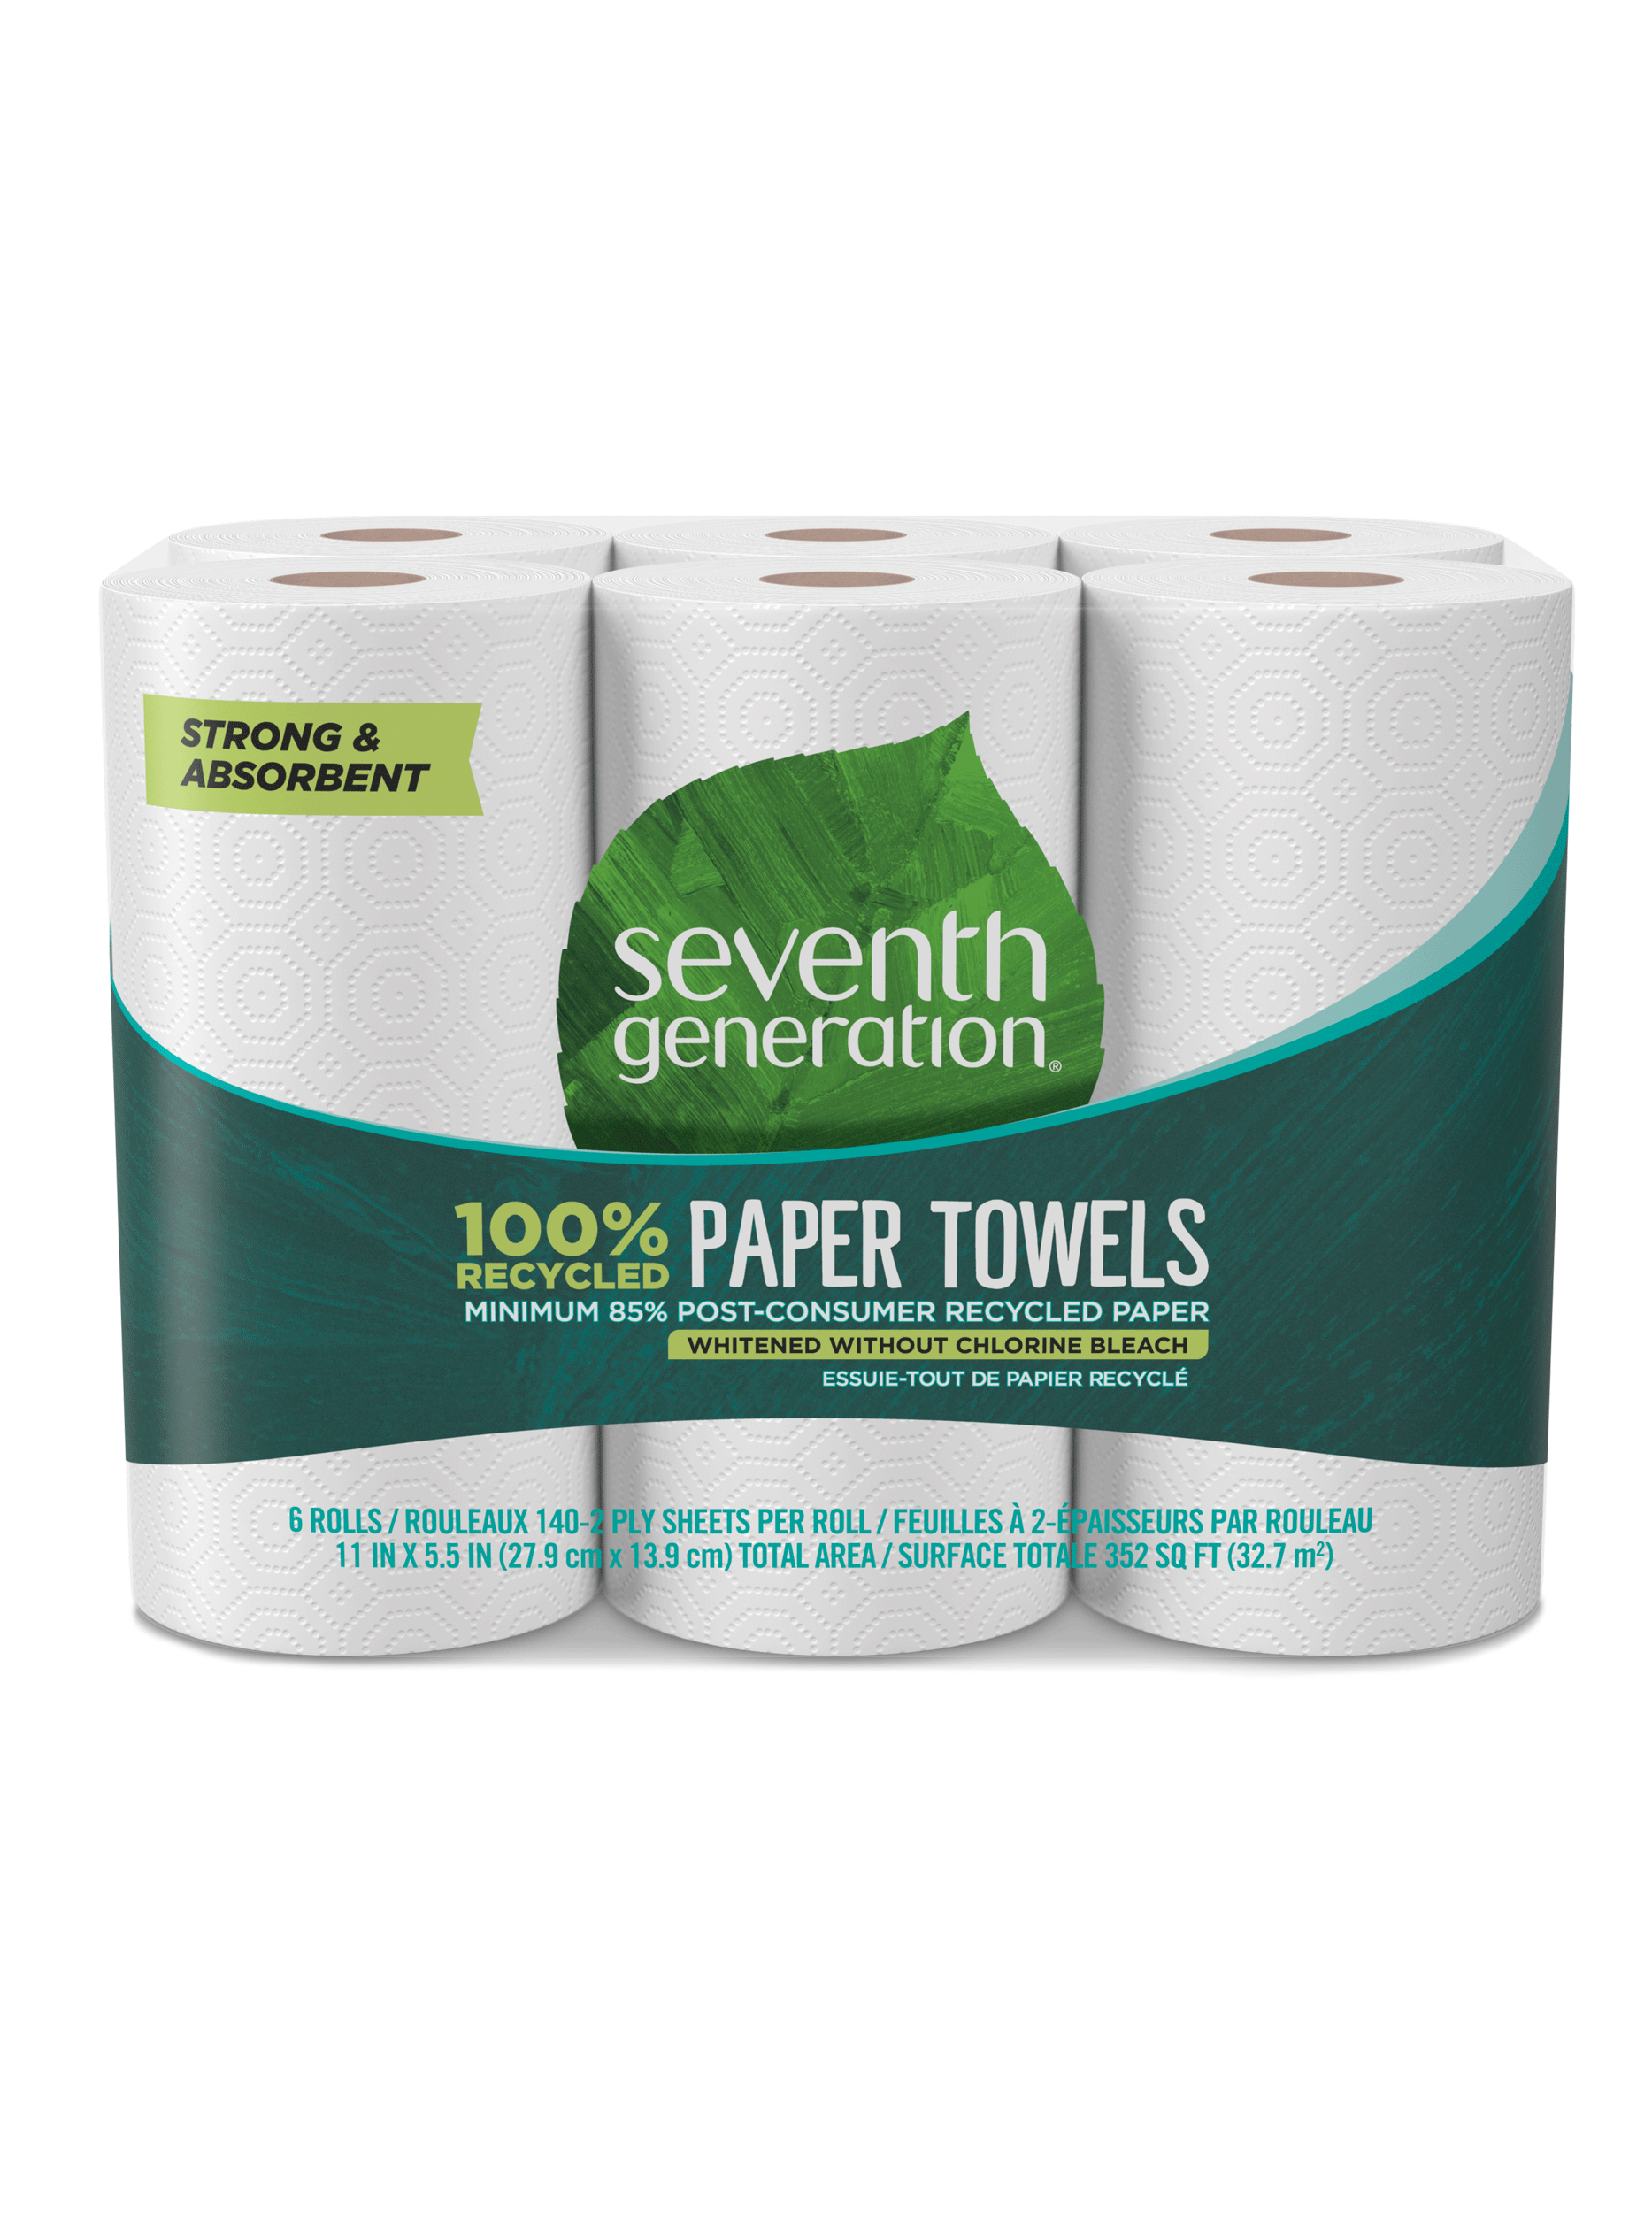 Seventh Generation Kitchen Bags, Flap Tie, White, Extra Strong, Tall, 13  Gallon